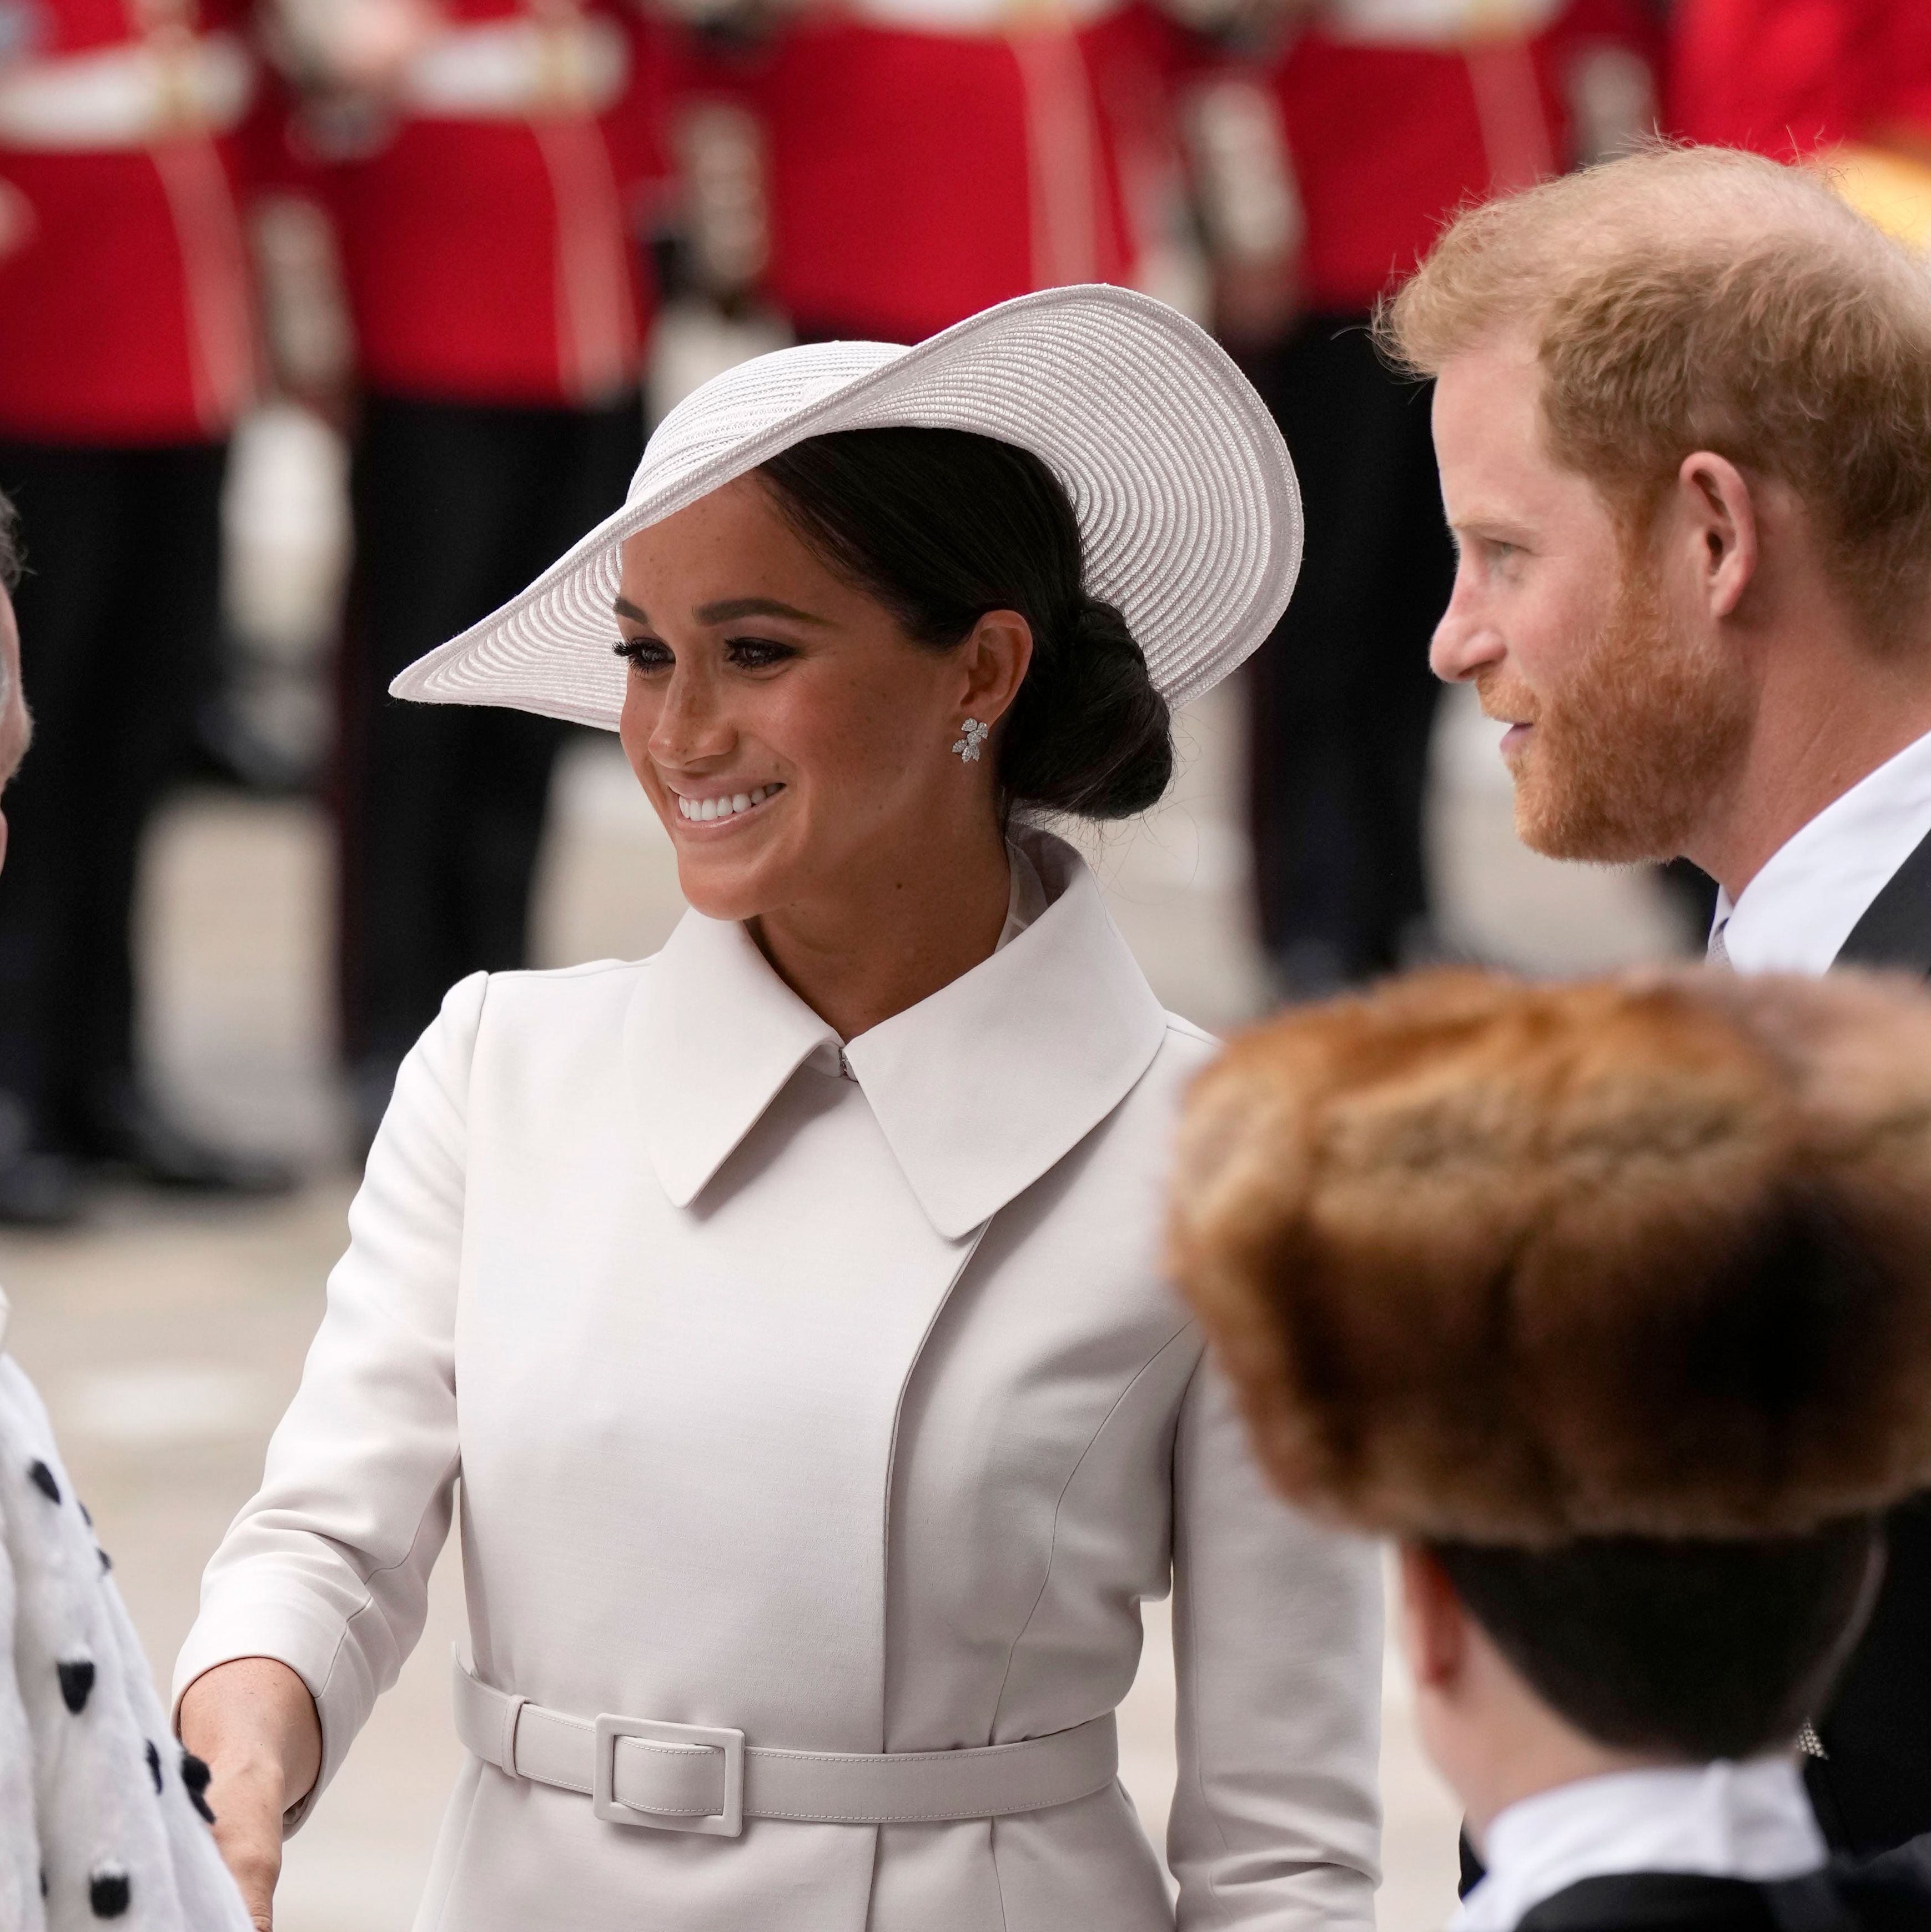 This is Meghan and Harry's most public appearance so far during the Platinum Jubilee.